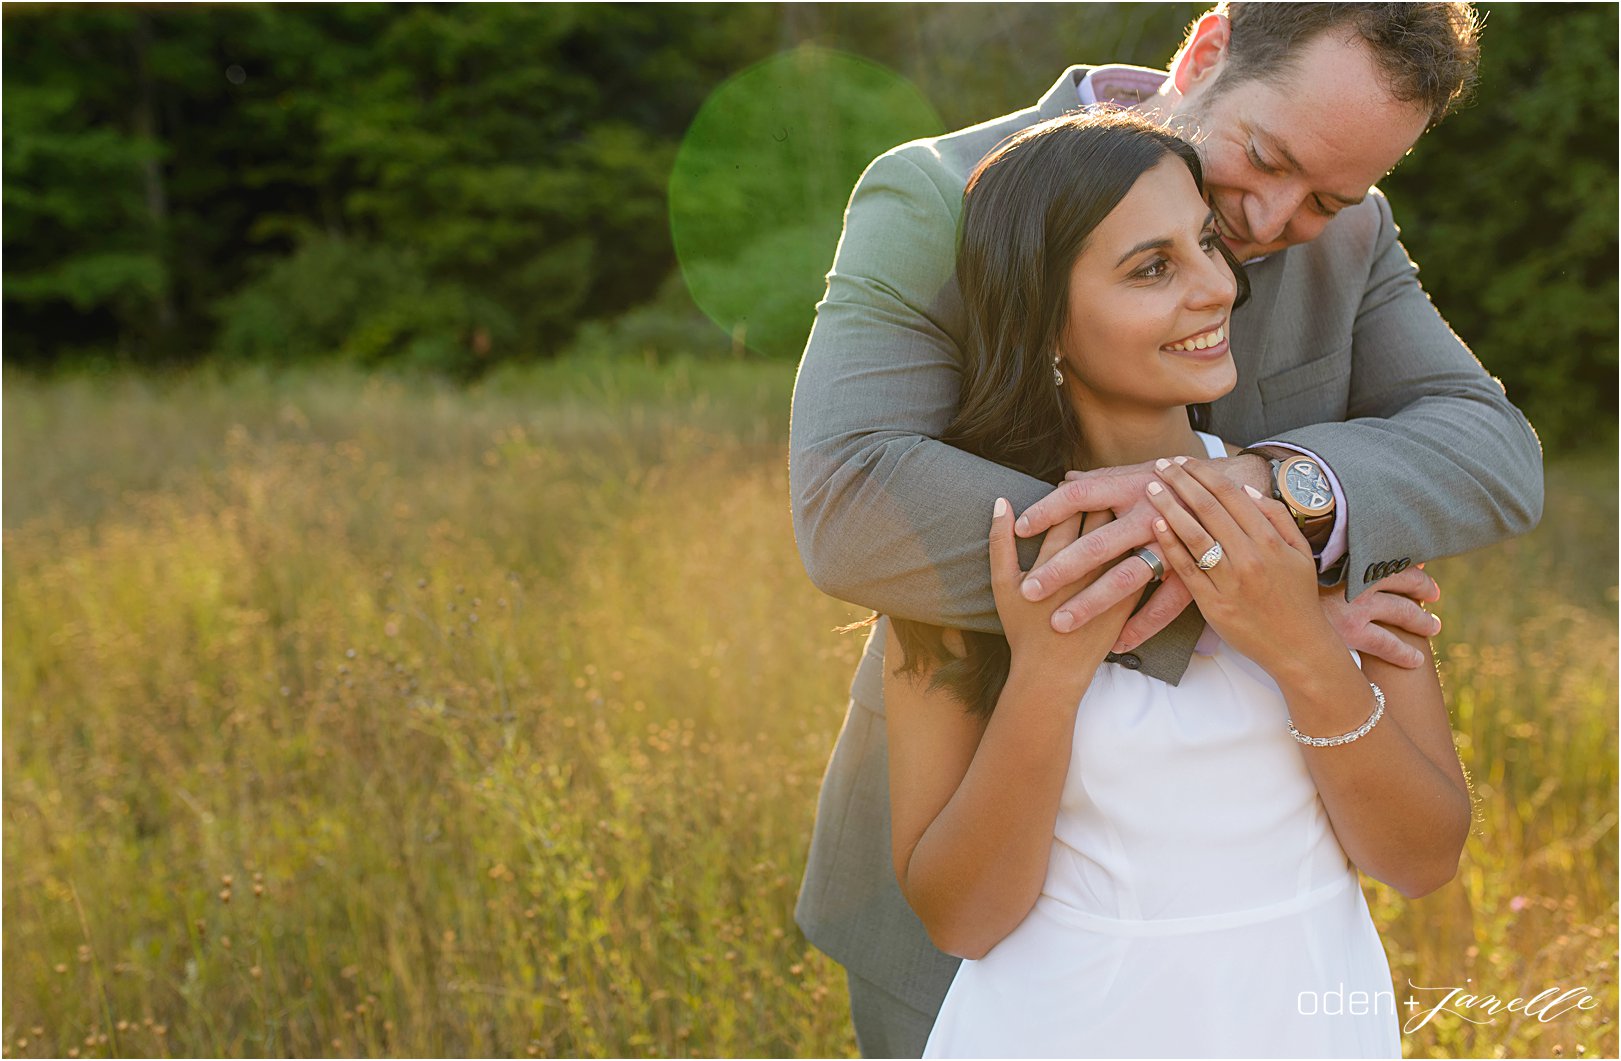 ELENA + JESSE | Oden and Janelle Photography 2016 |ODE_4927|8.jpg